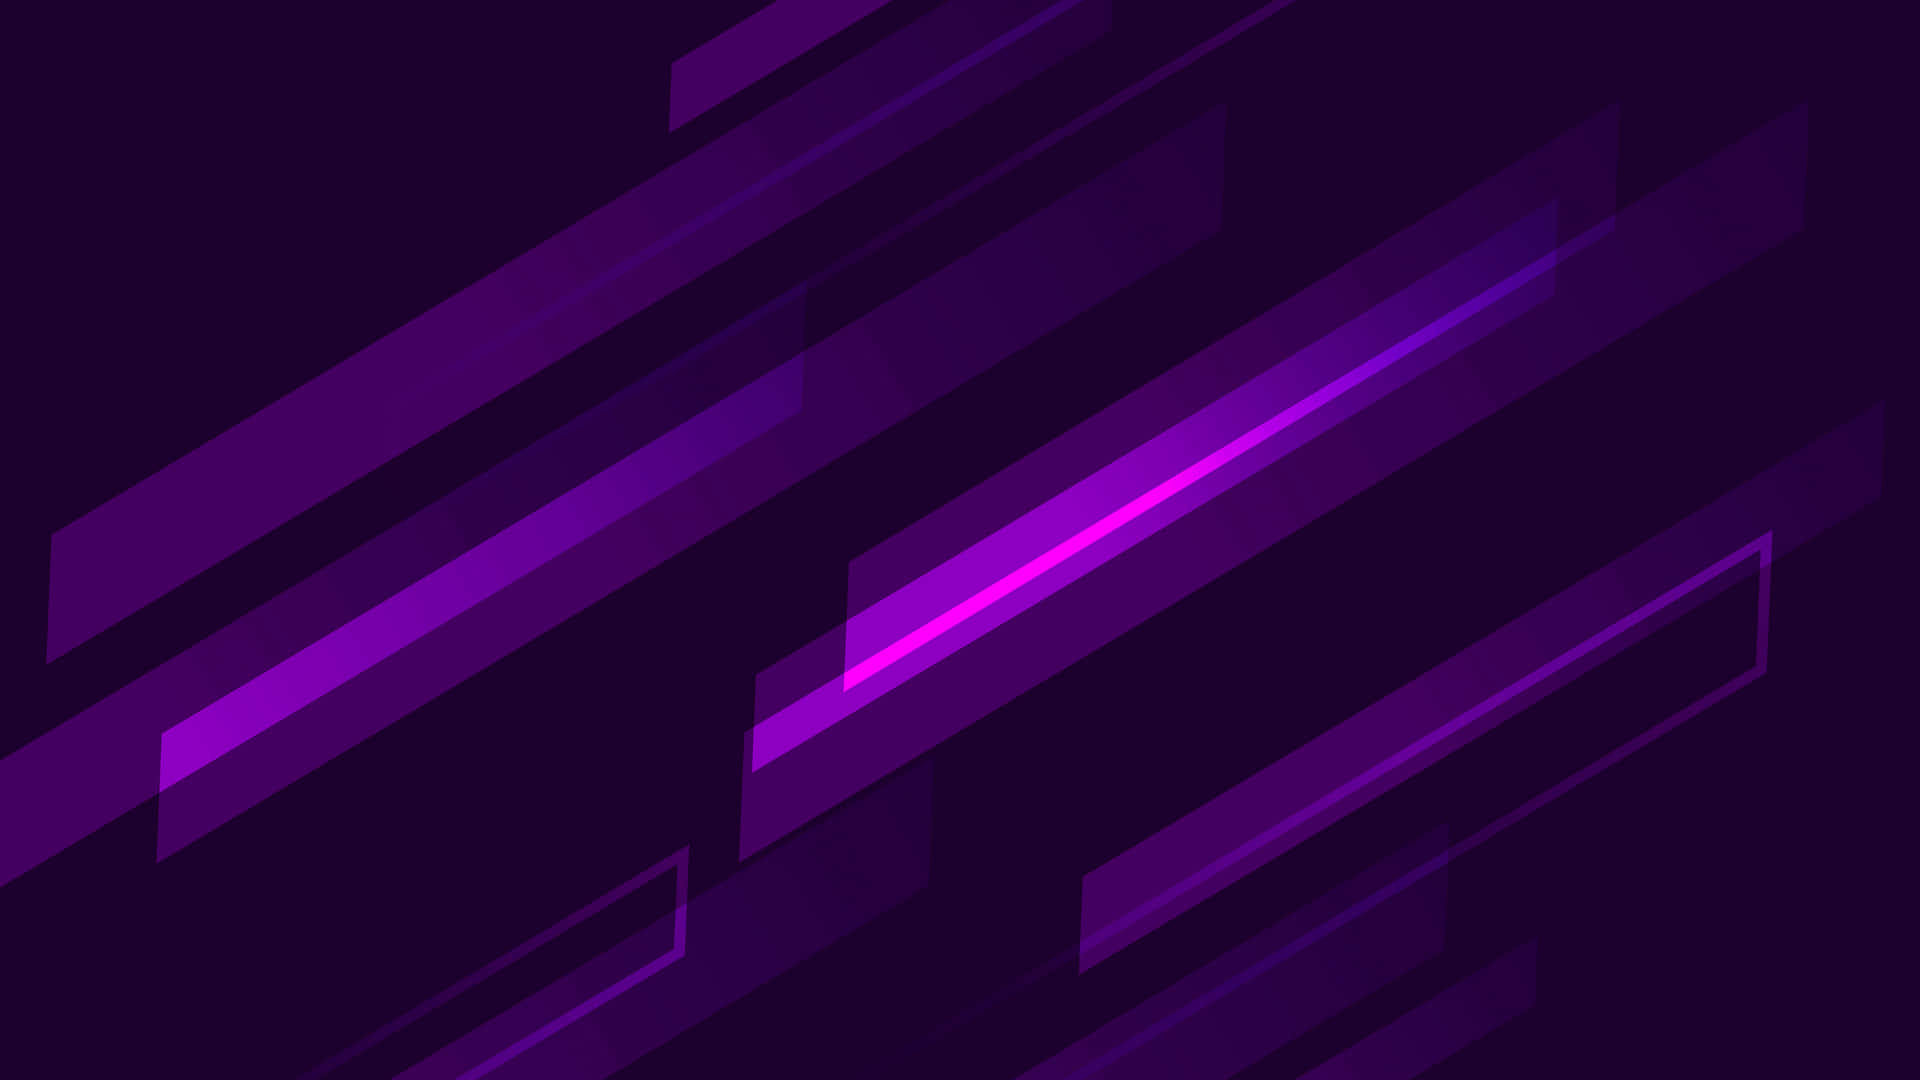 A richly colored dark purple background with a subtle texture.